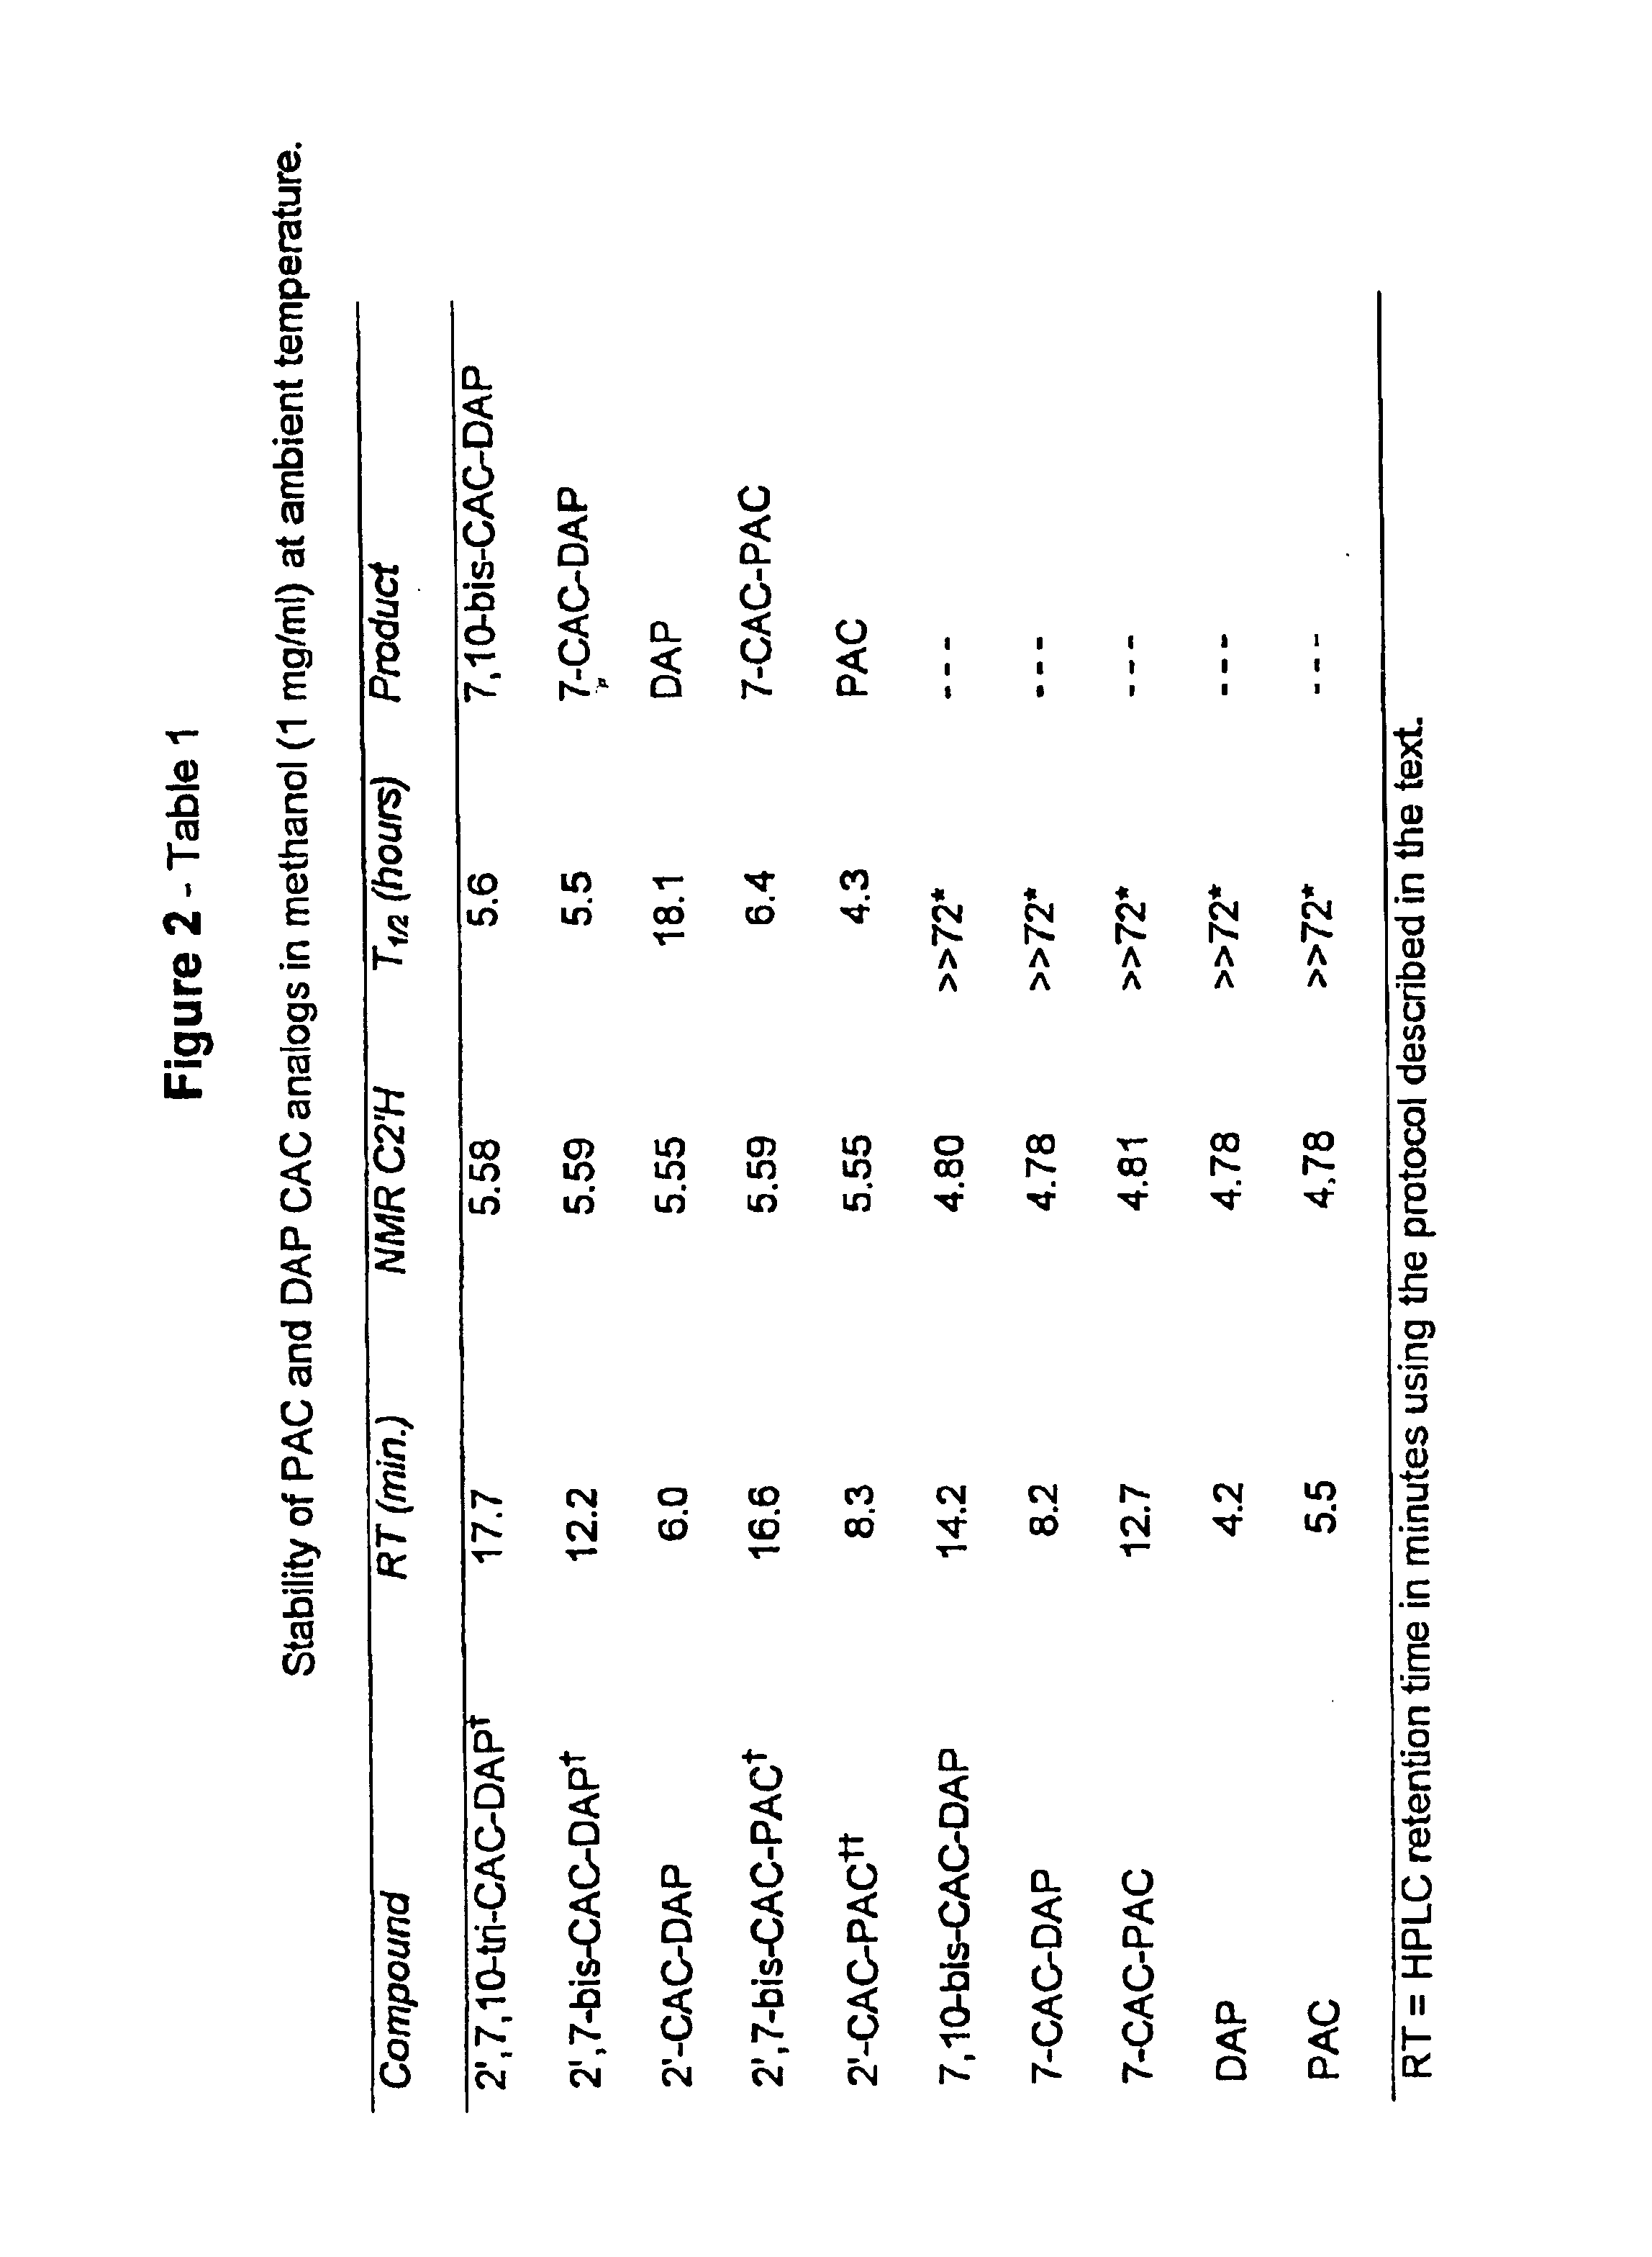 Method for the selective removal of acyl-functionality attached to the 2'-hydroxy-group of paclitaxel-related derivatives